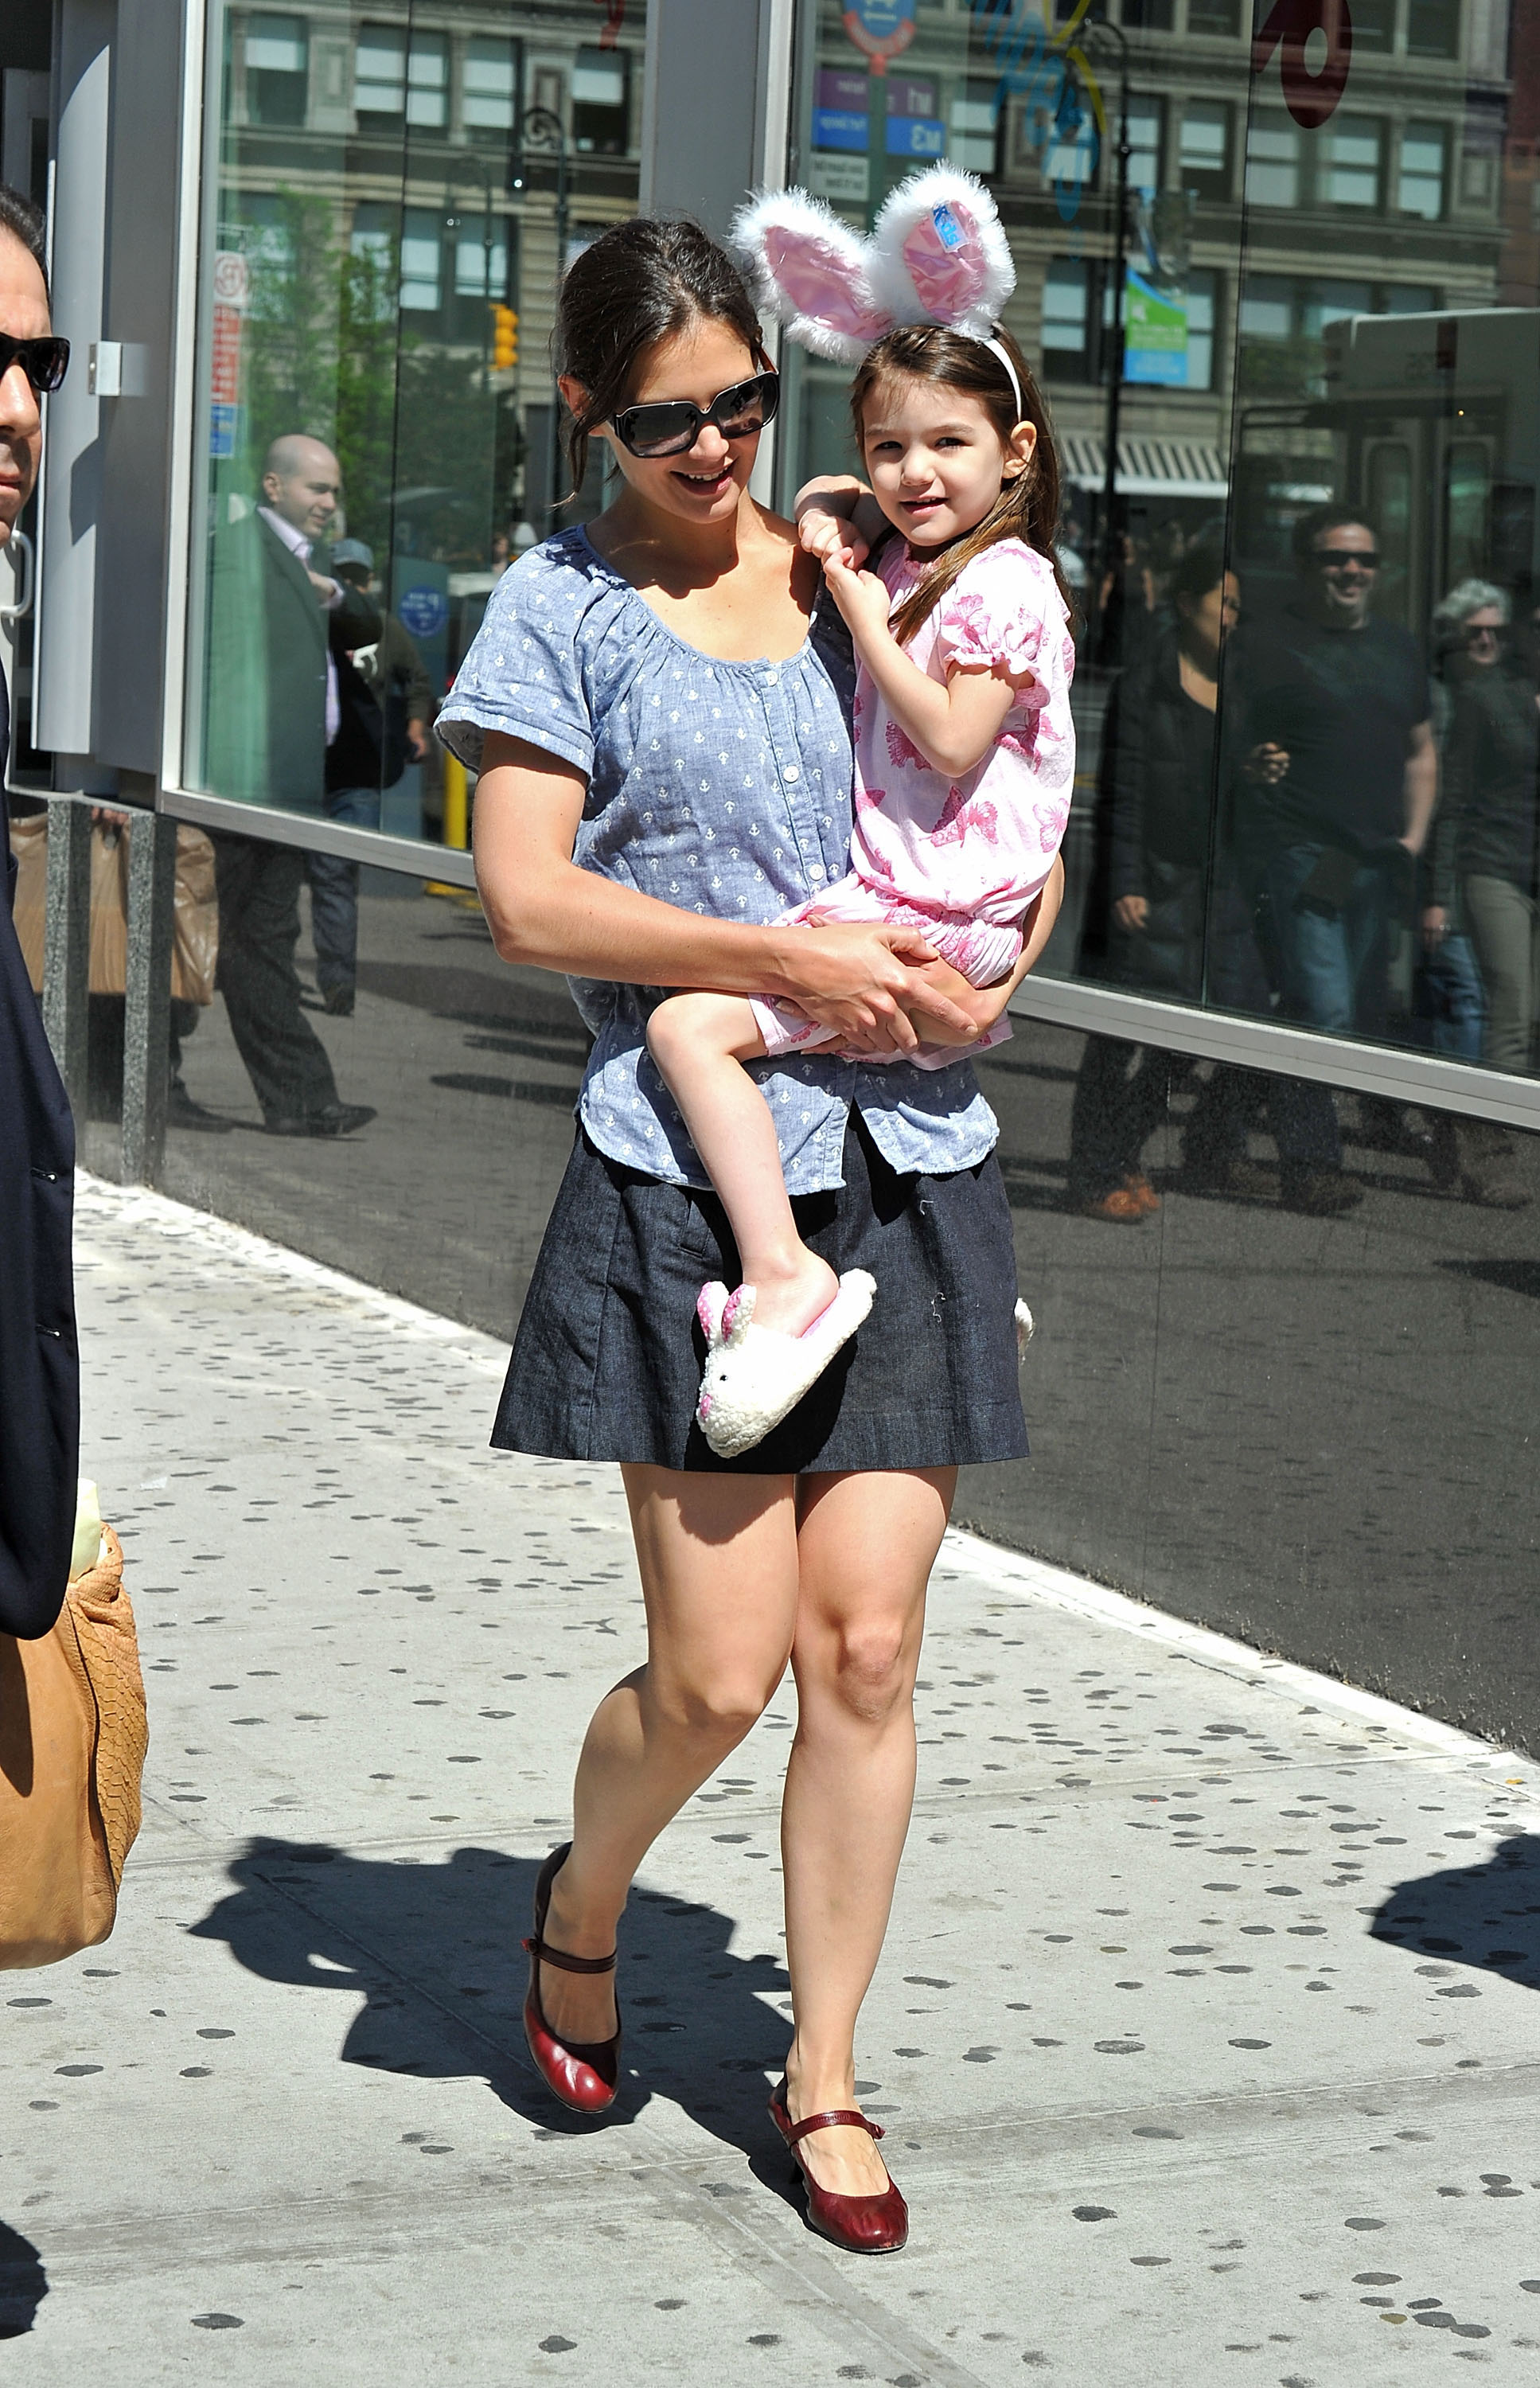 Katie Holmes and Suri Cruise seen walking around Union Square in New York City, on April 10, 2010. | Source: Getty Images